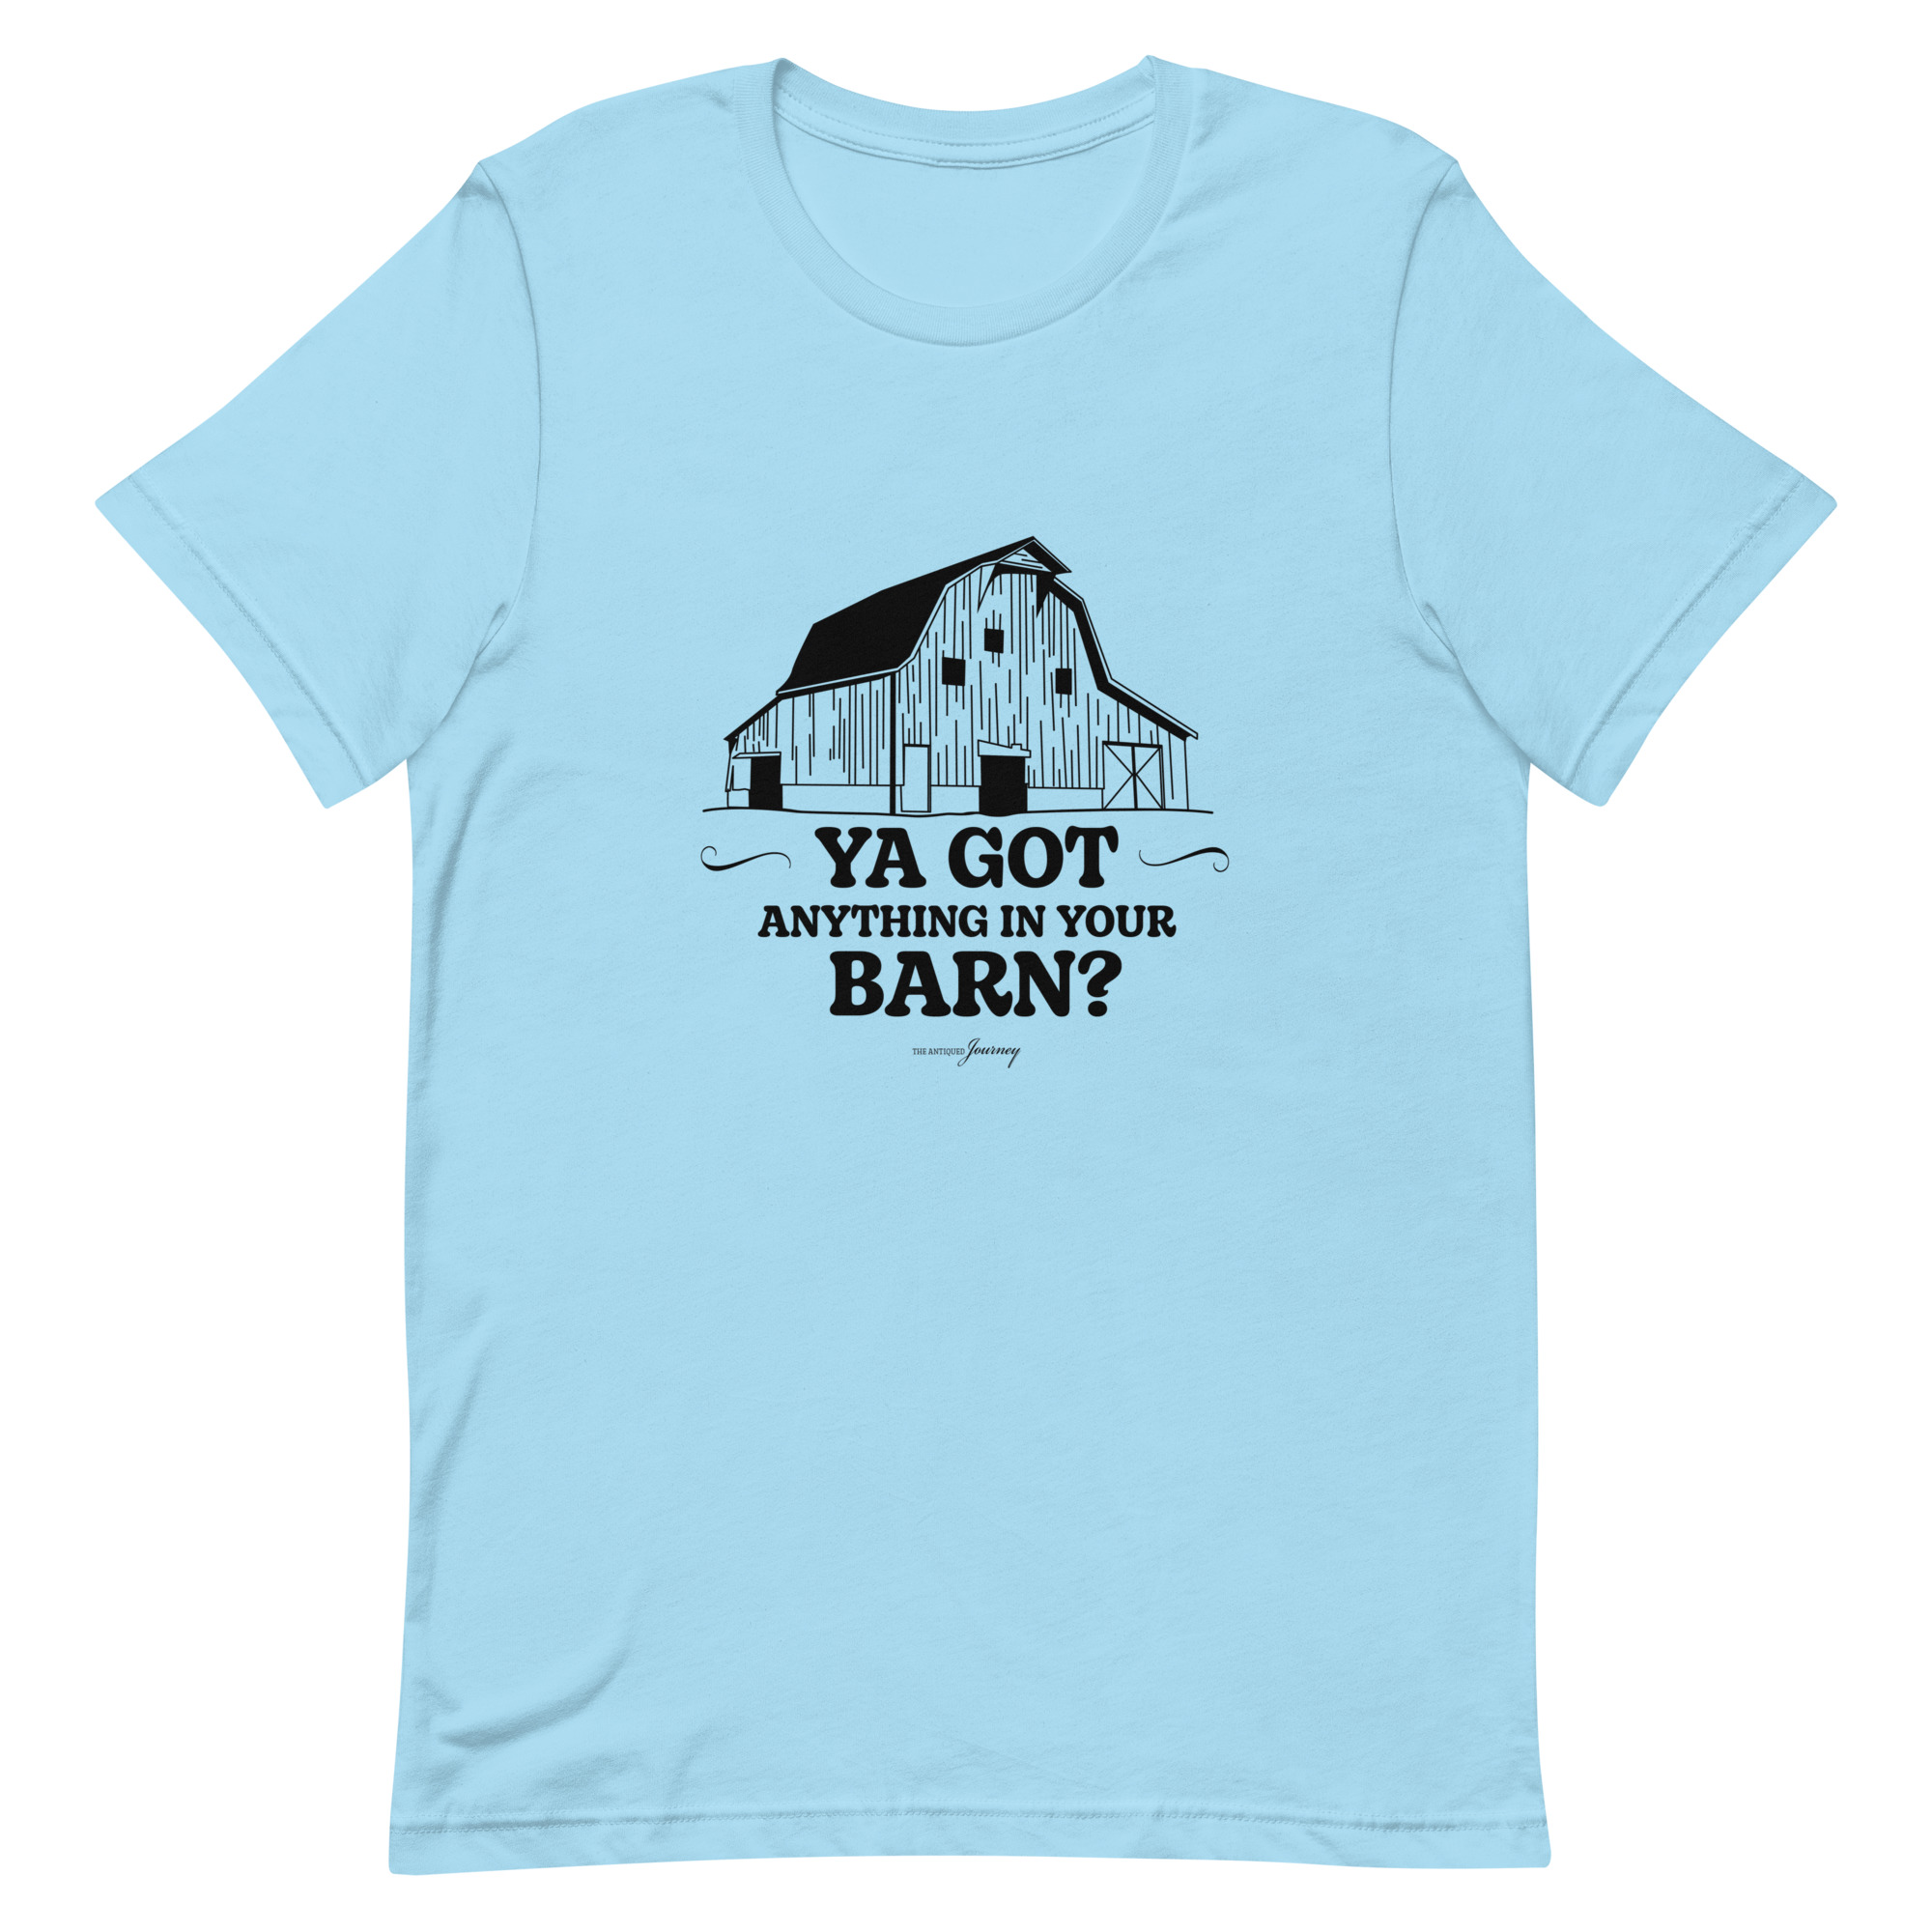 Antiqued Journey T-Shirt Ya Got Anything In Your Barn? - The Journey